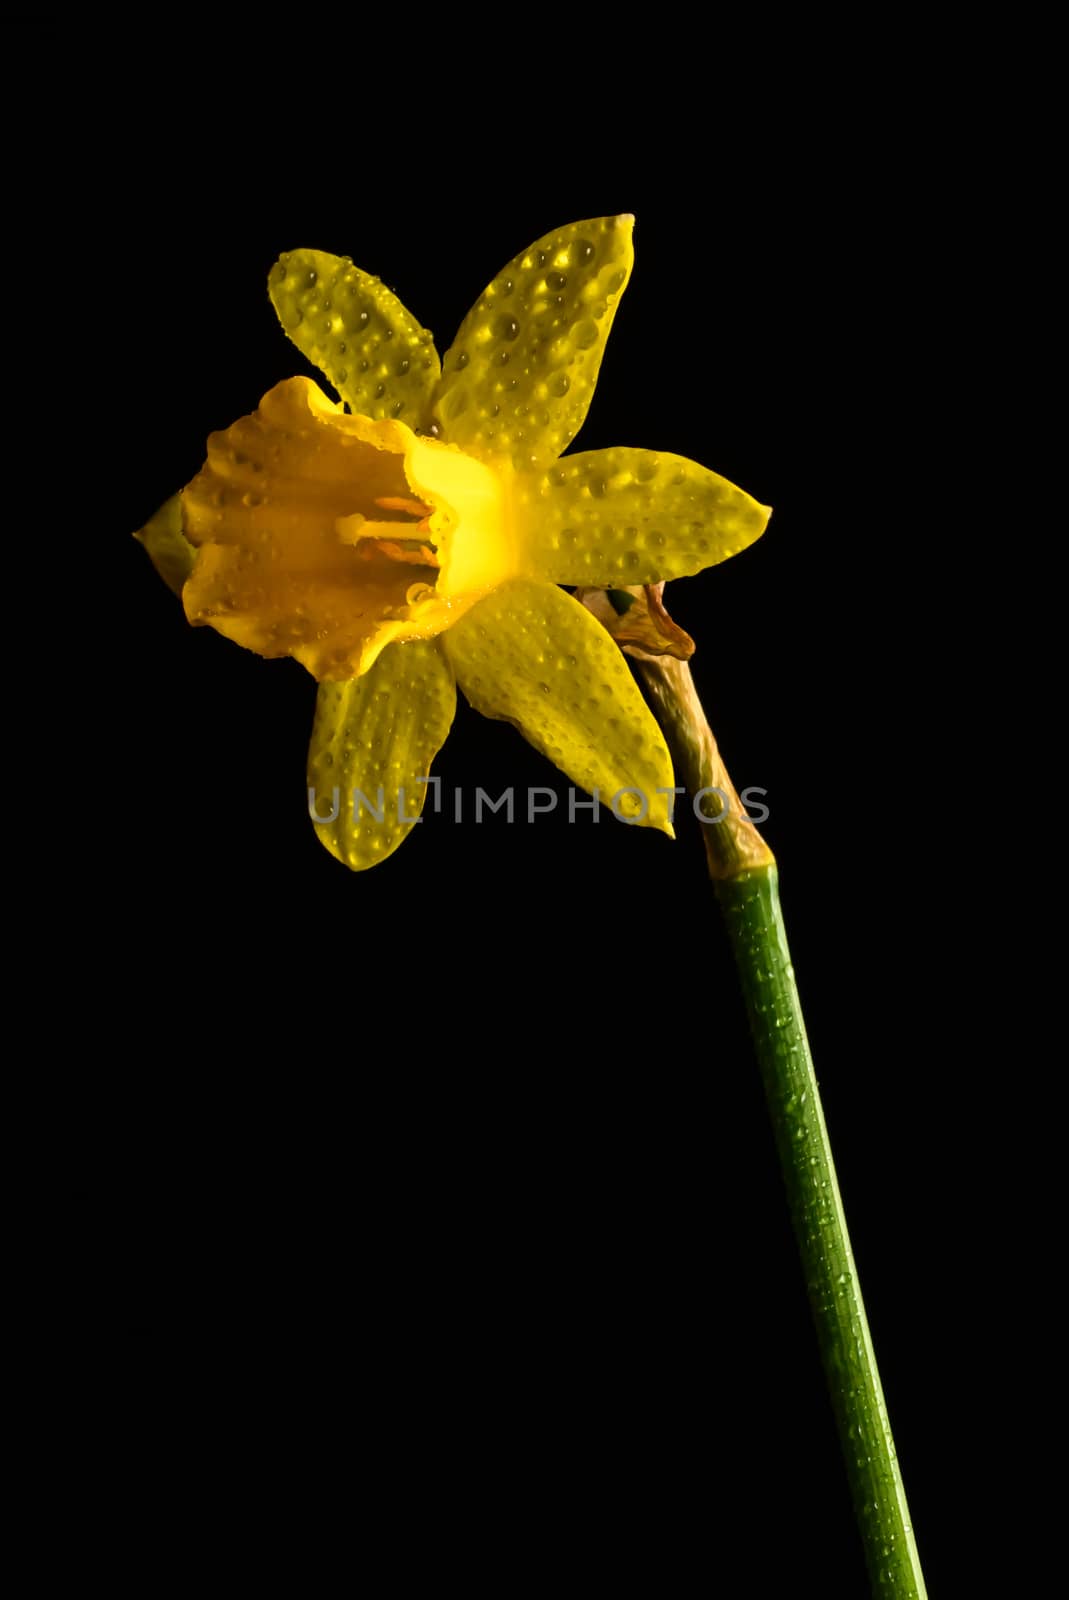 Single yellow daffodil flower isolated on a black background